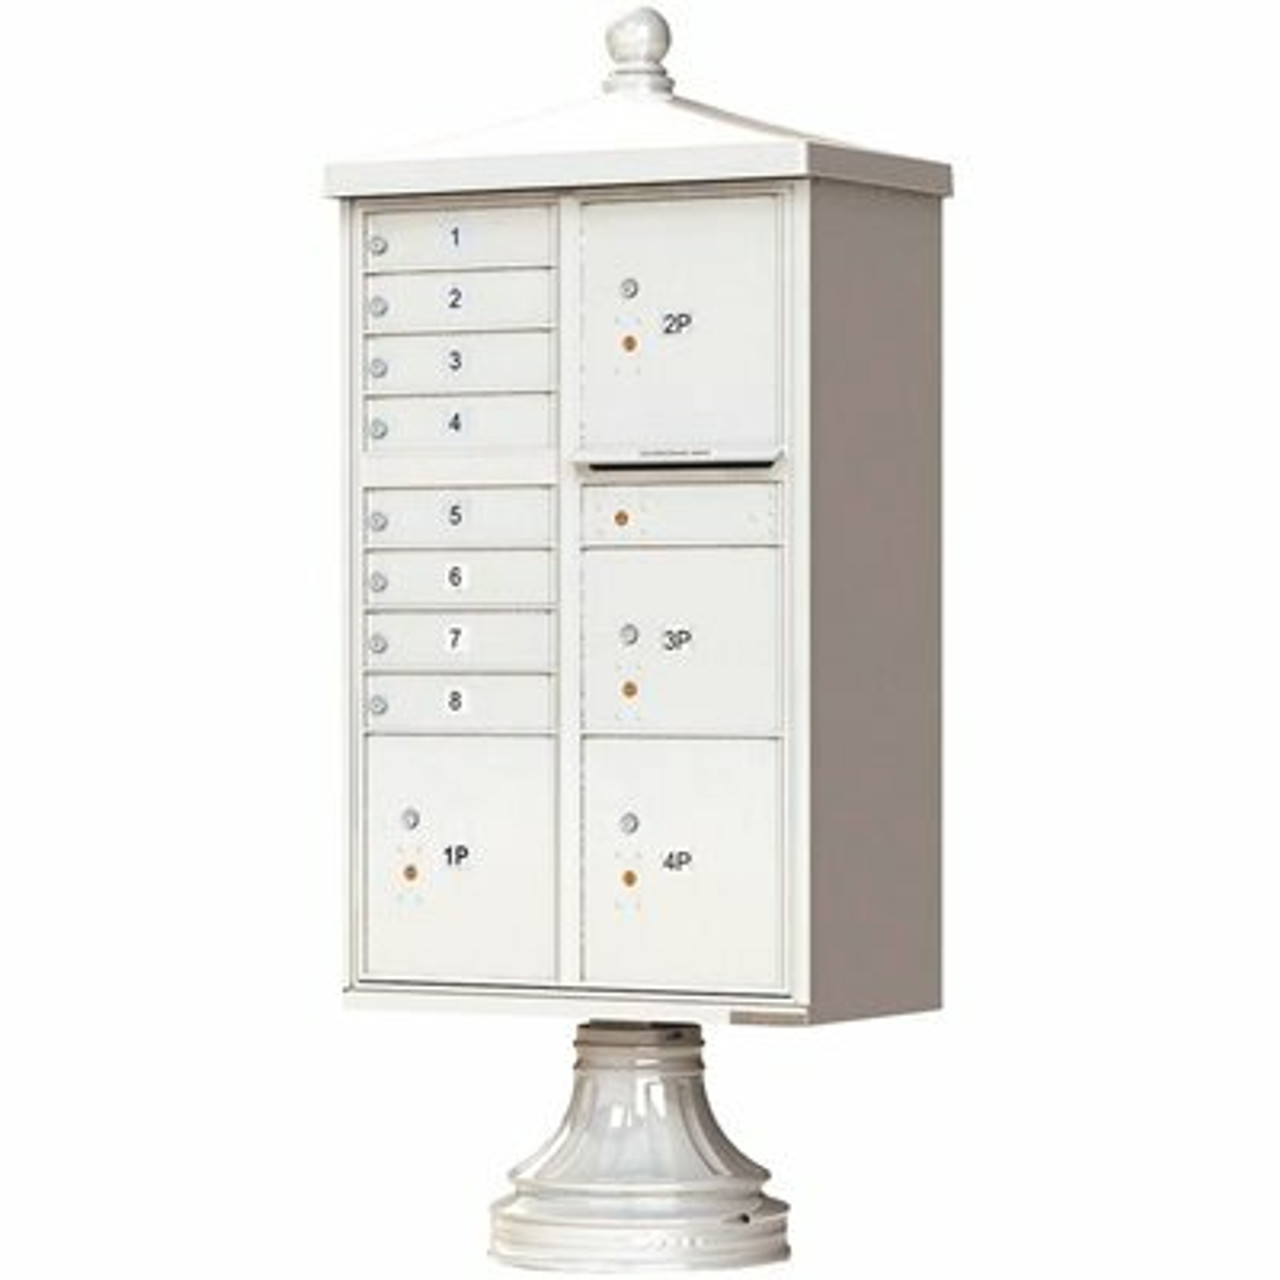 Florence 1570 Series 8-Mailboxes, 1-Outgoing, 4-Parcel Lockers, Vital Cluster Box Unit With Vogue Traditional Accessories - 2474387